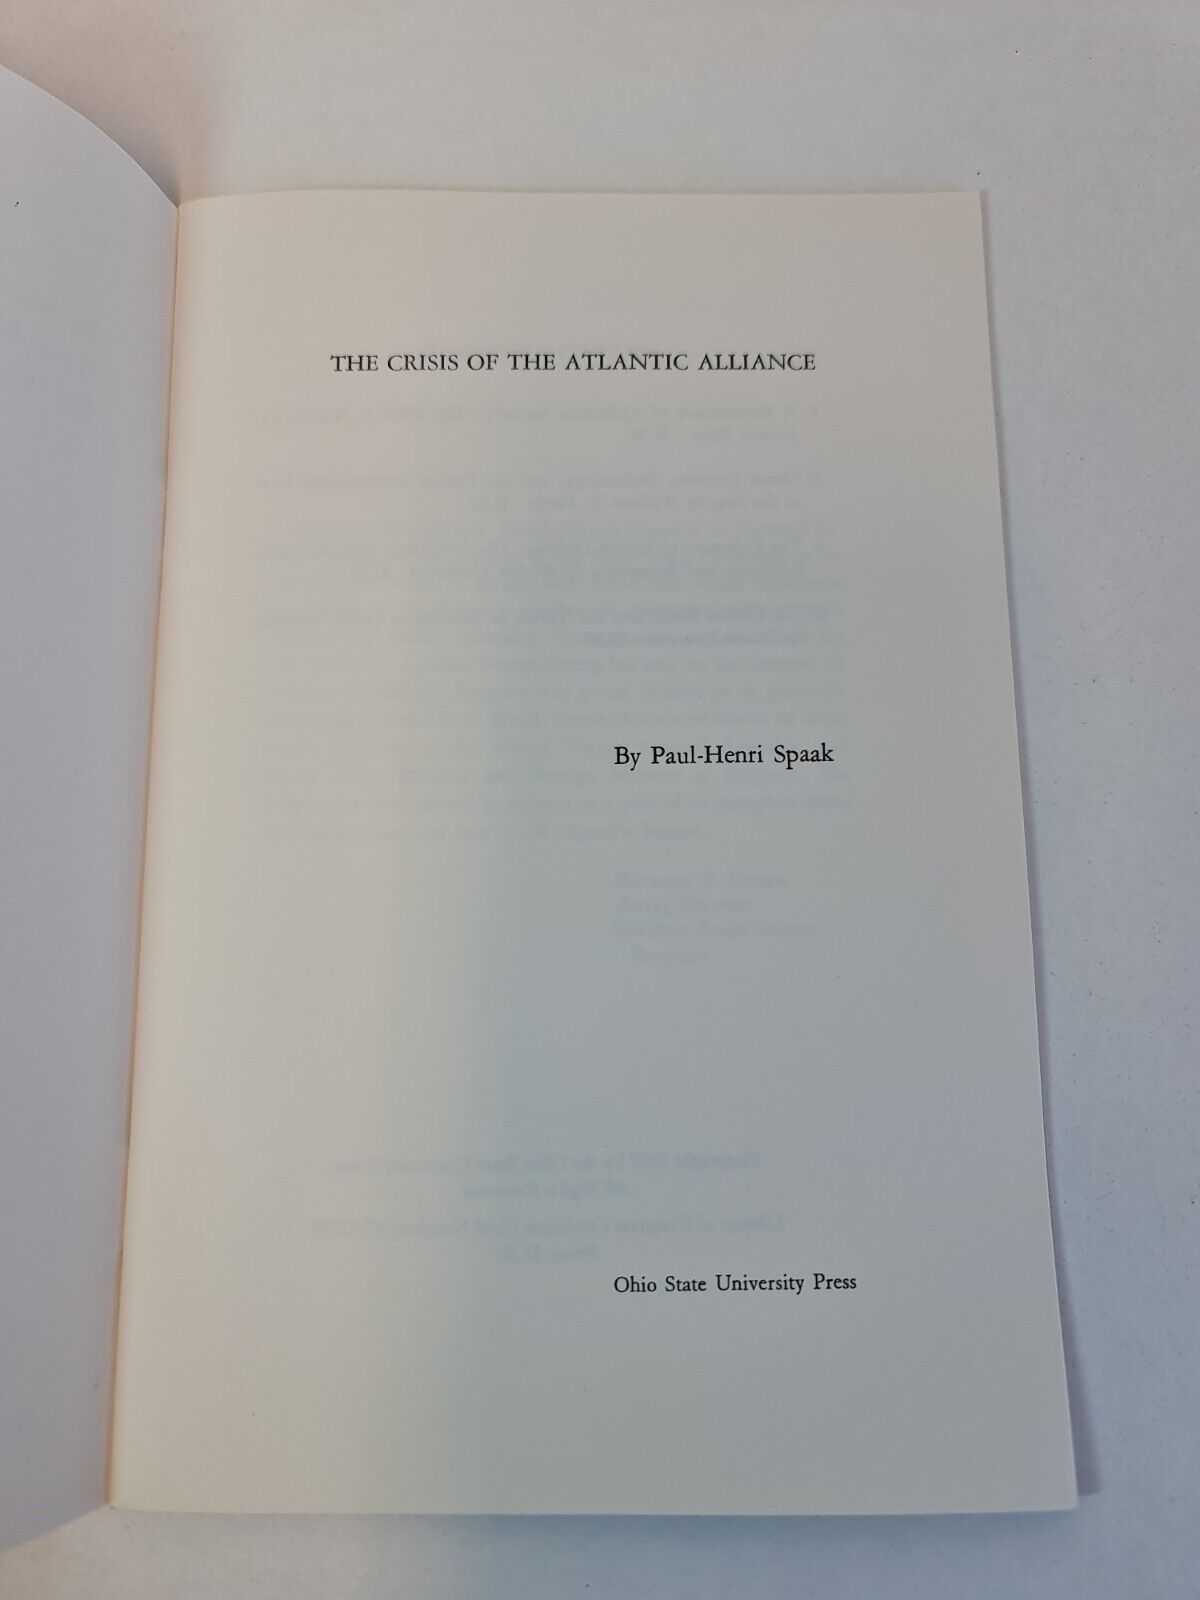 The Crisis of the Atlantic Alliance by Paul-Henri Spaak (1967)